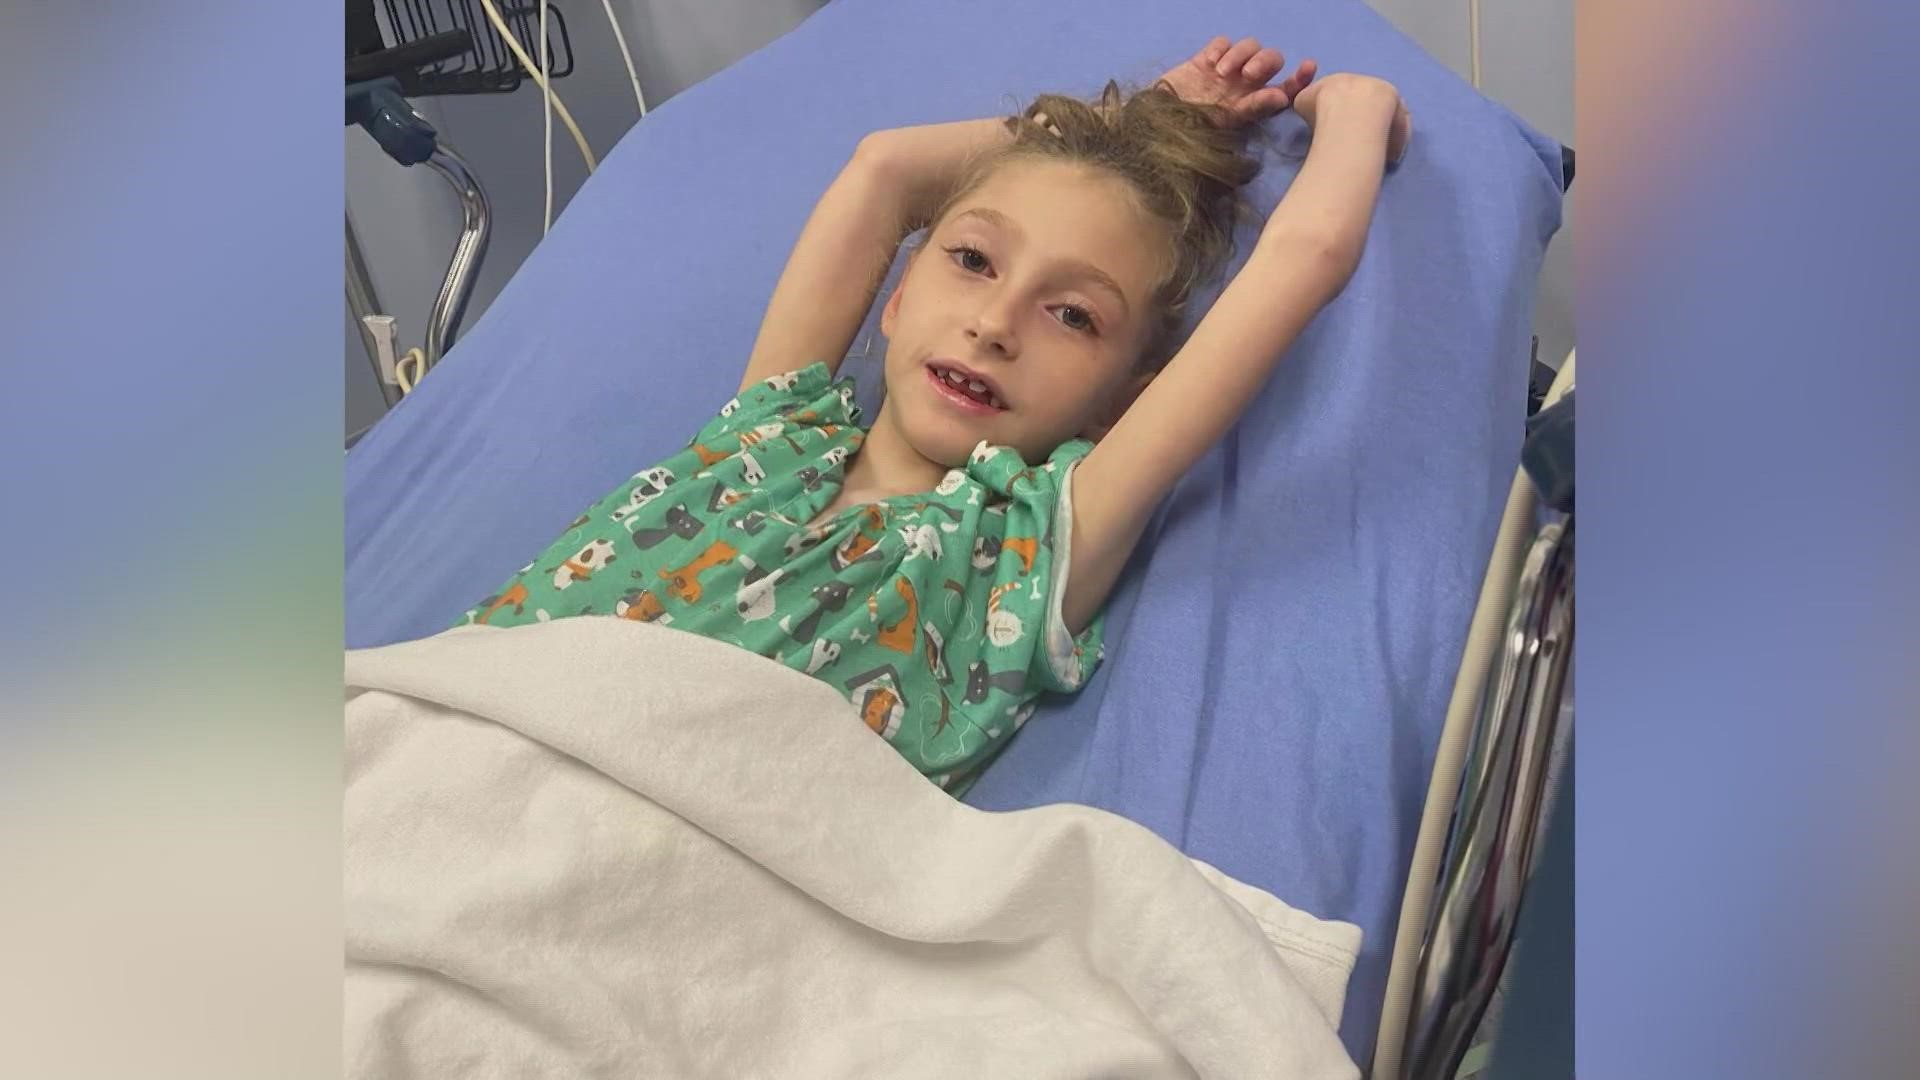 7-year-old Lissy Frugé's nearly had her feeding tube surgery postponed back in September. Her parents say having the surgery potentially saved her life.